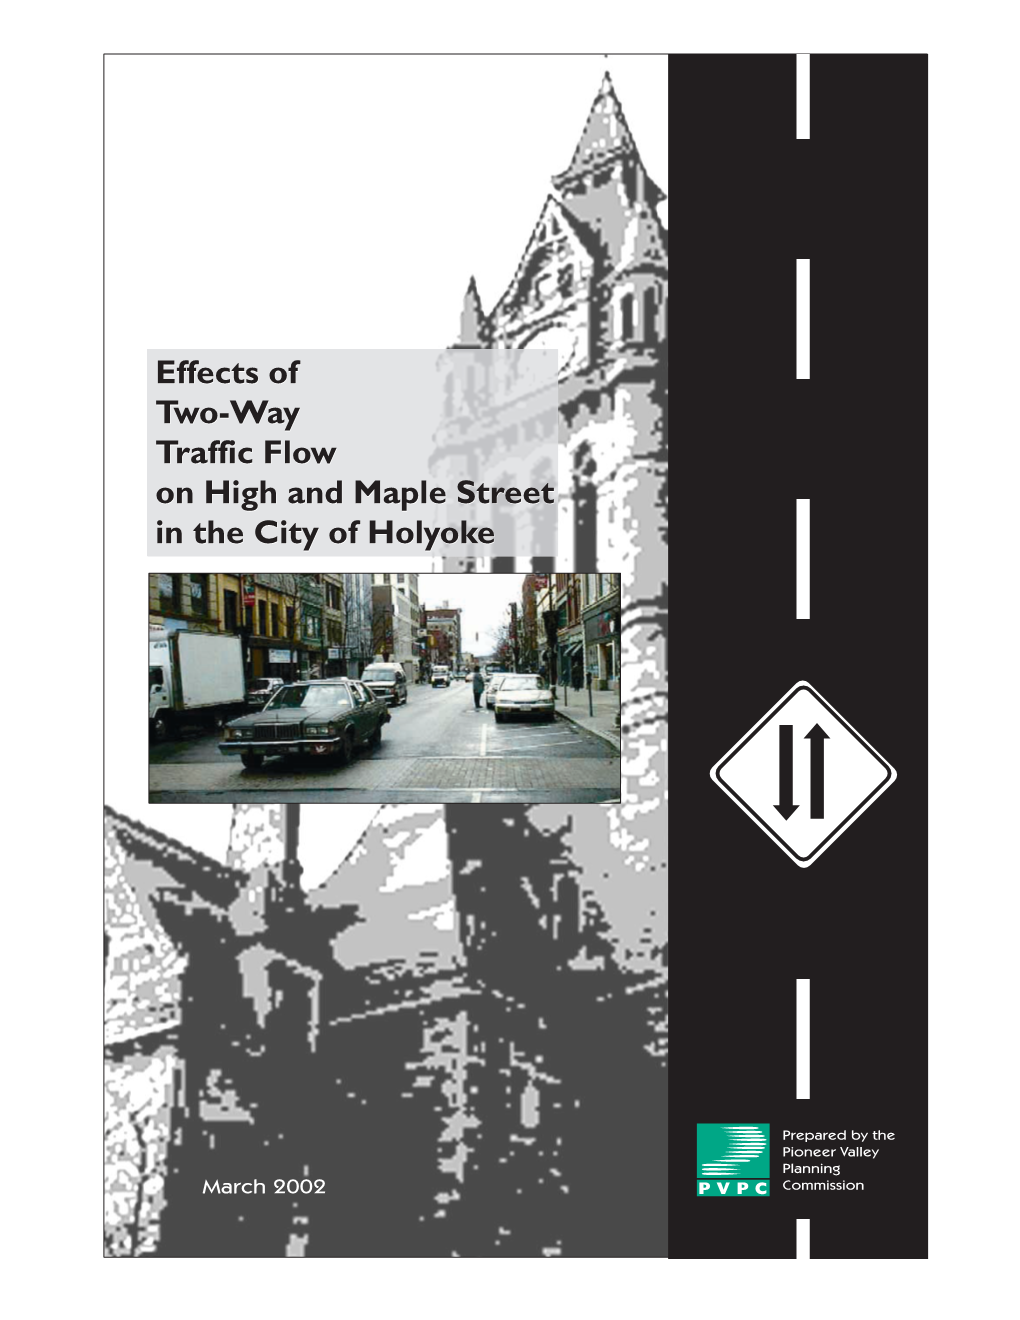 Effects of Two-Way Traffic Flow on High and Maple Street in the City Of